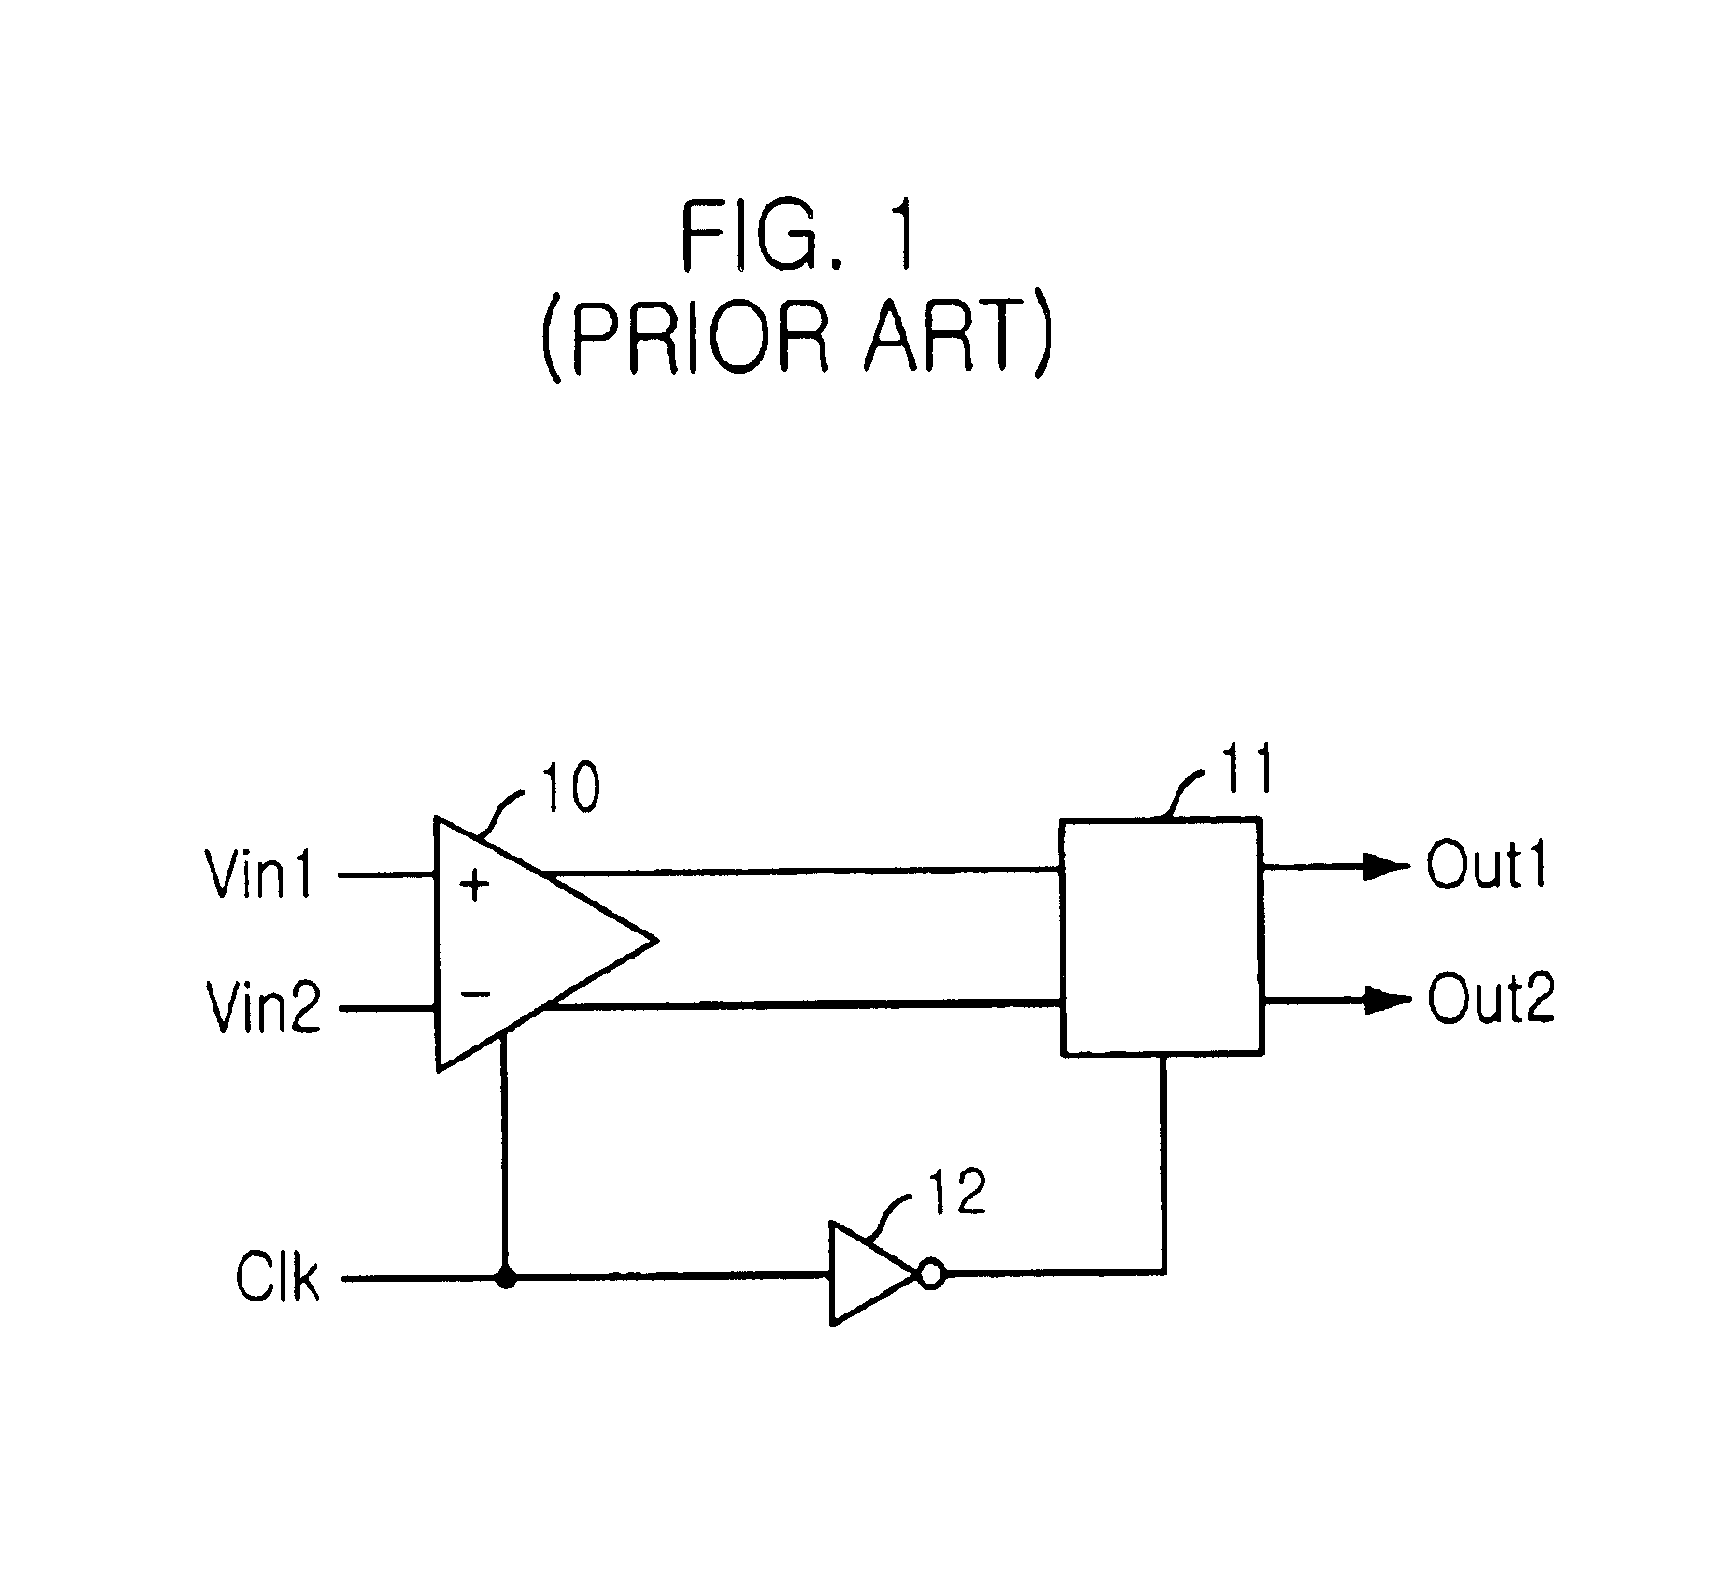 Comparison apparatus operated at a low voltage